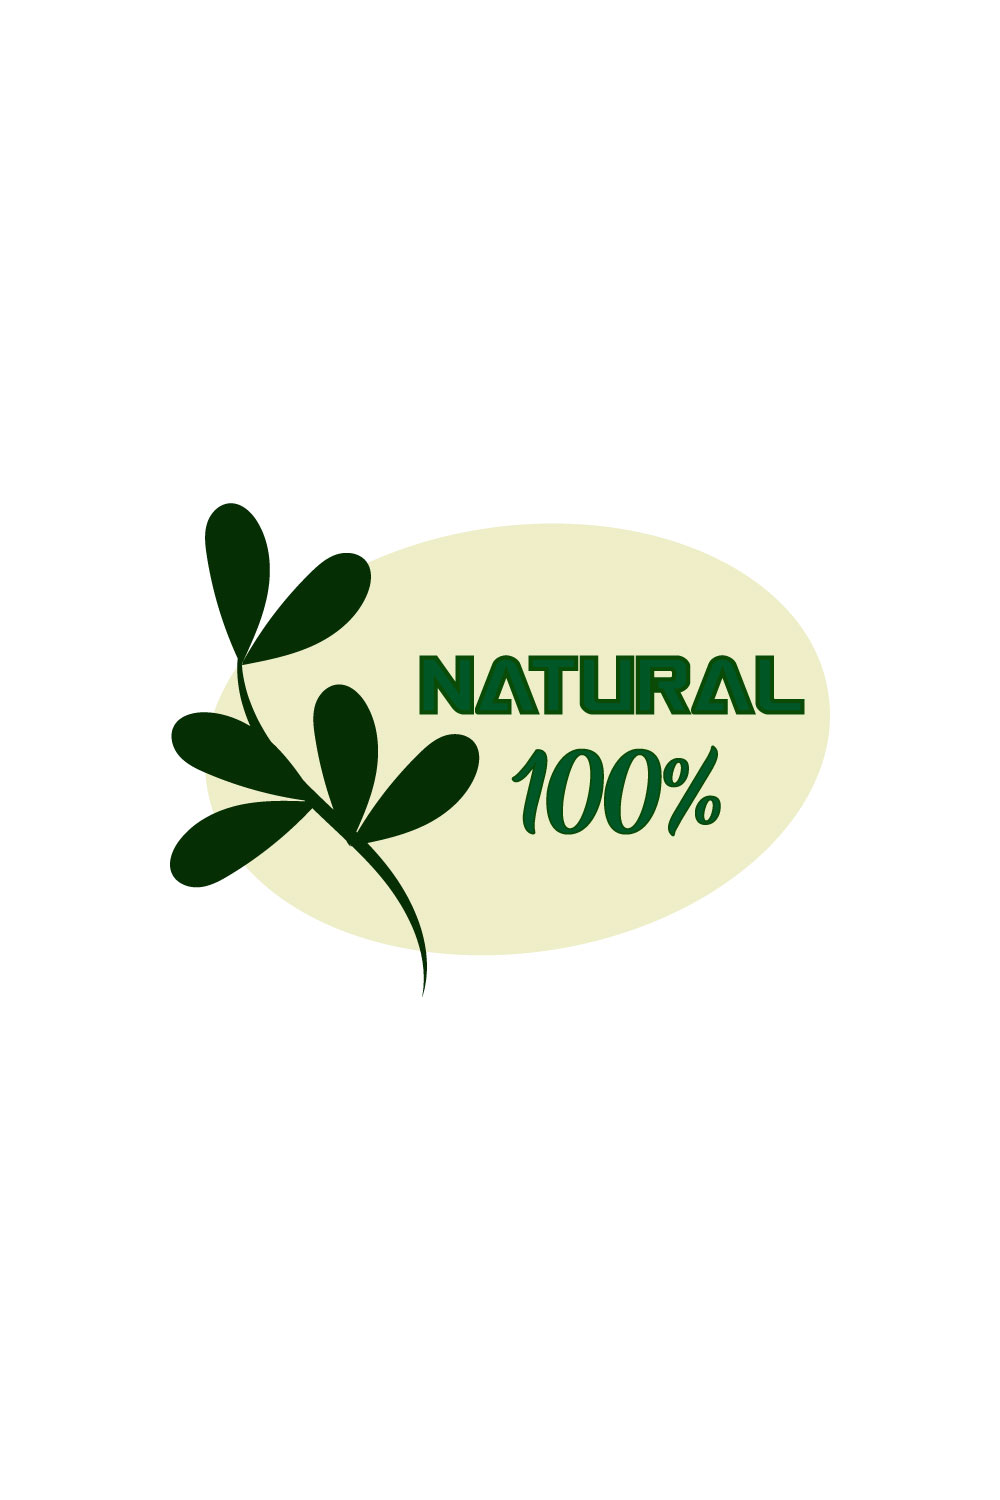 Free Natural eco logo pinterest preview image.